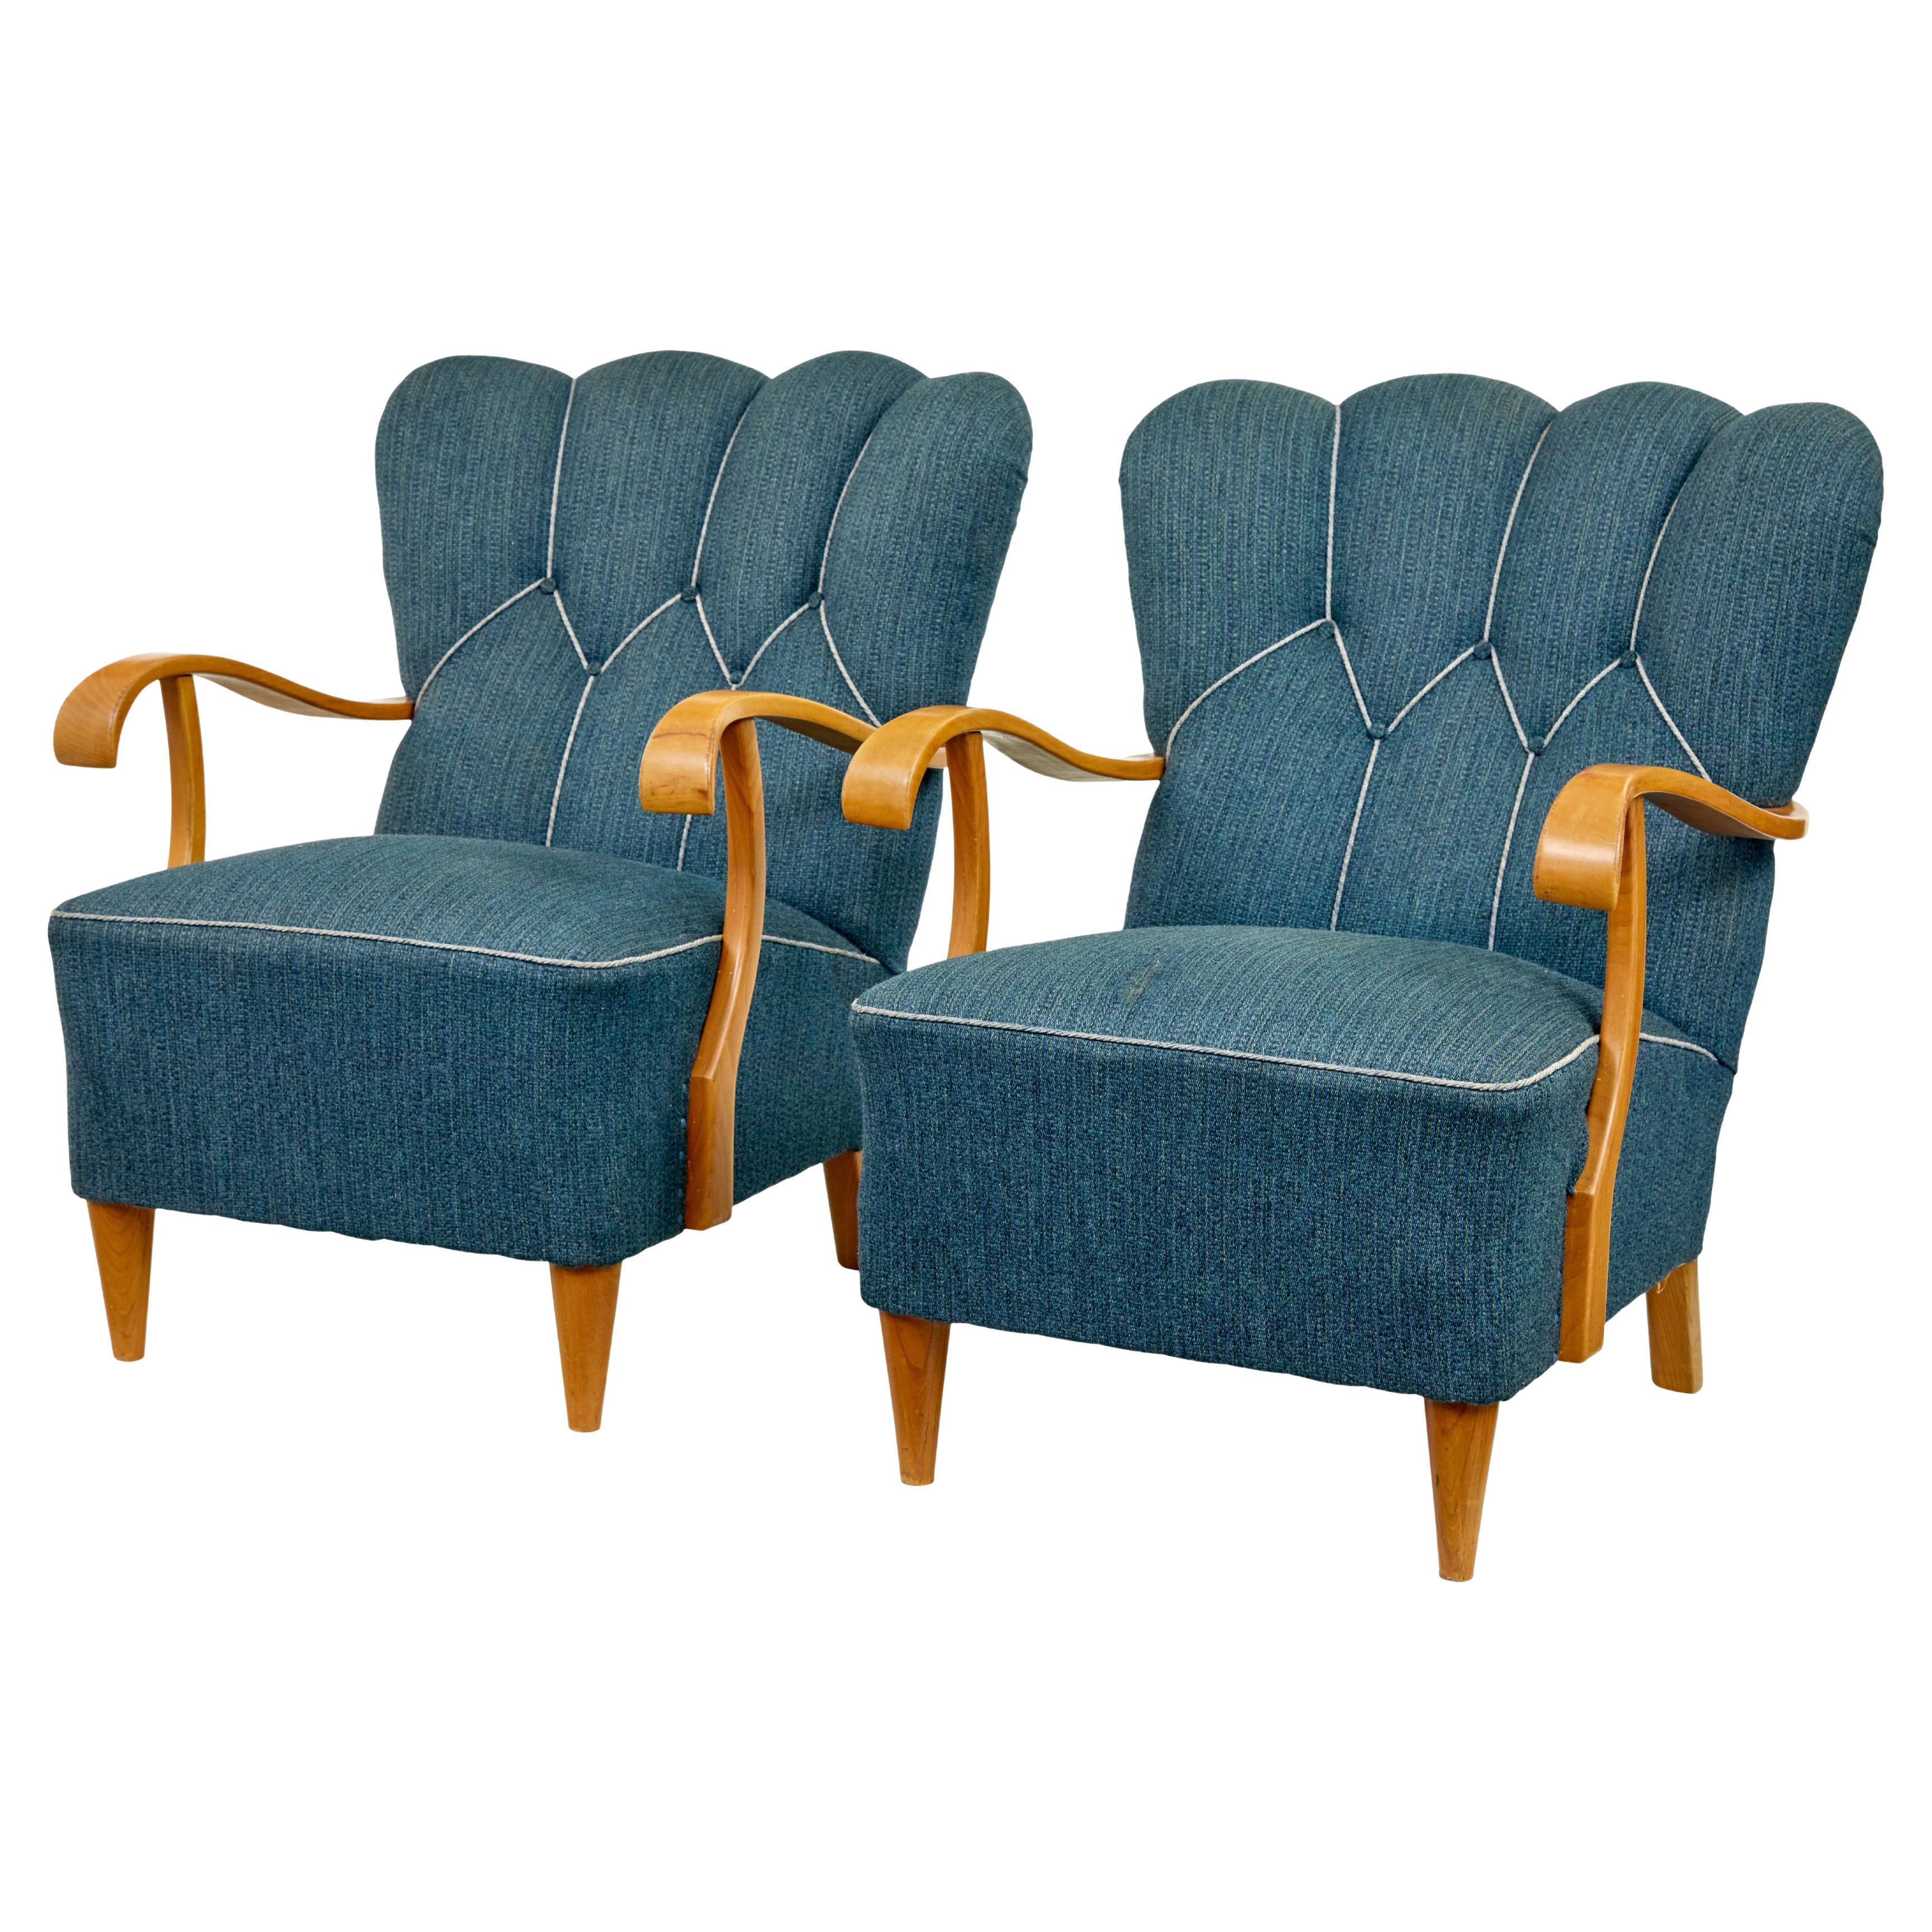 Pair of Scandinavian 1950’s shell back armchairs For Sale